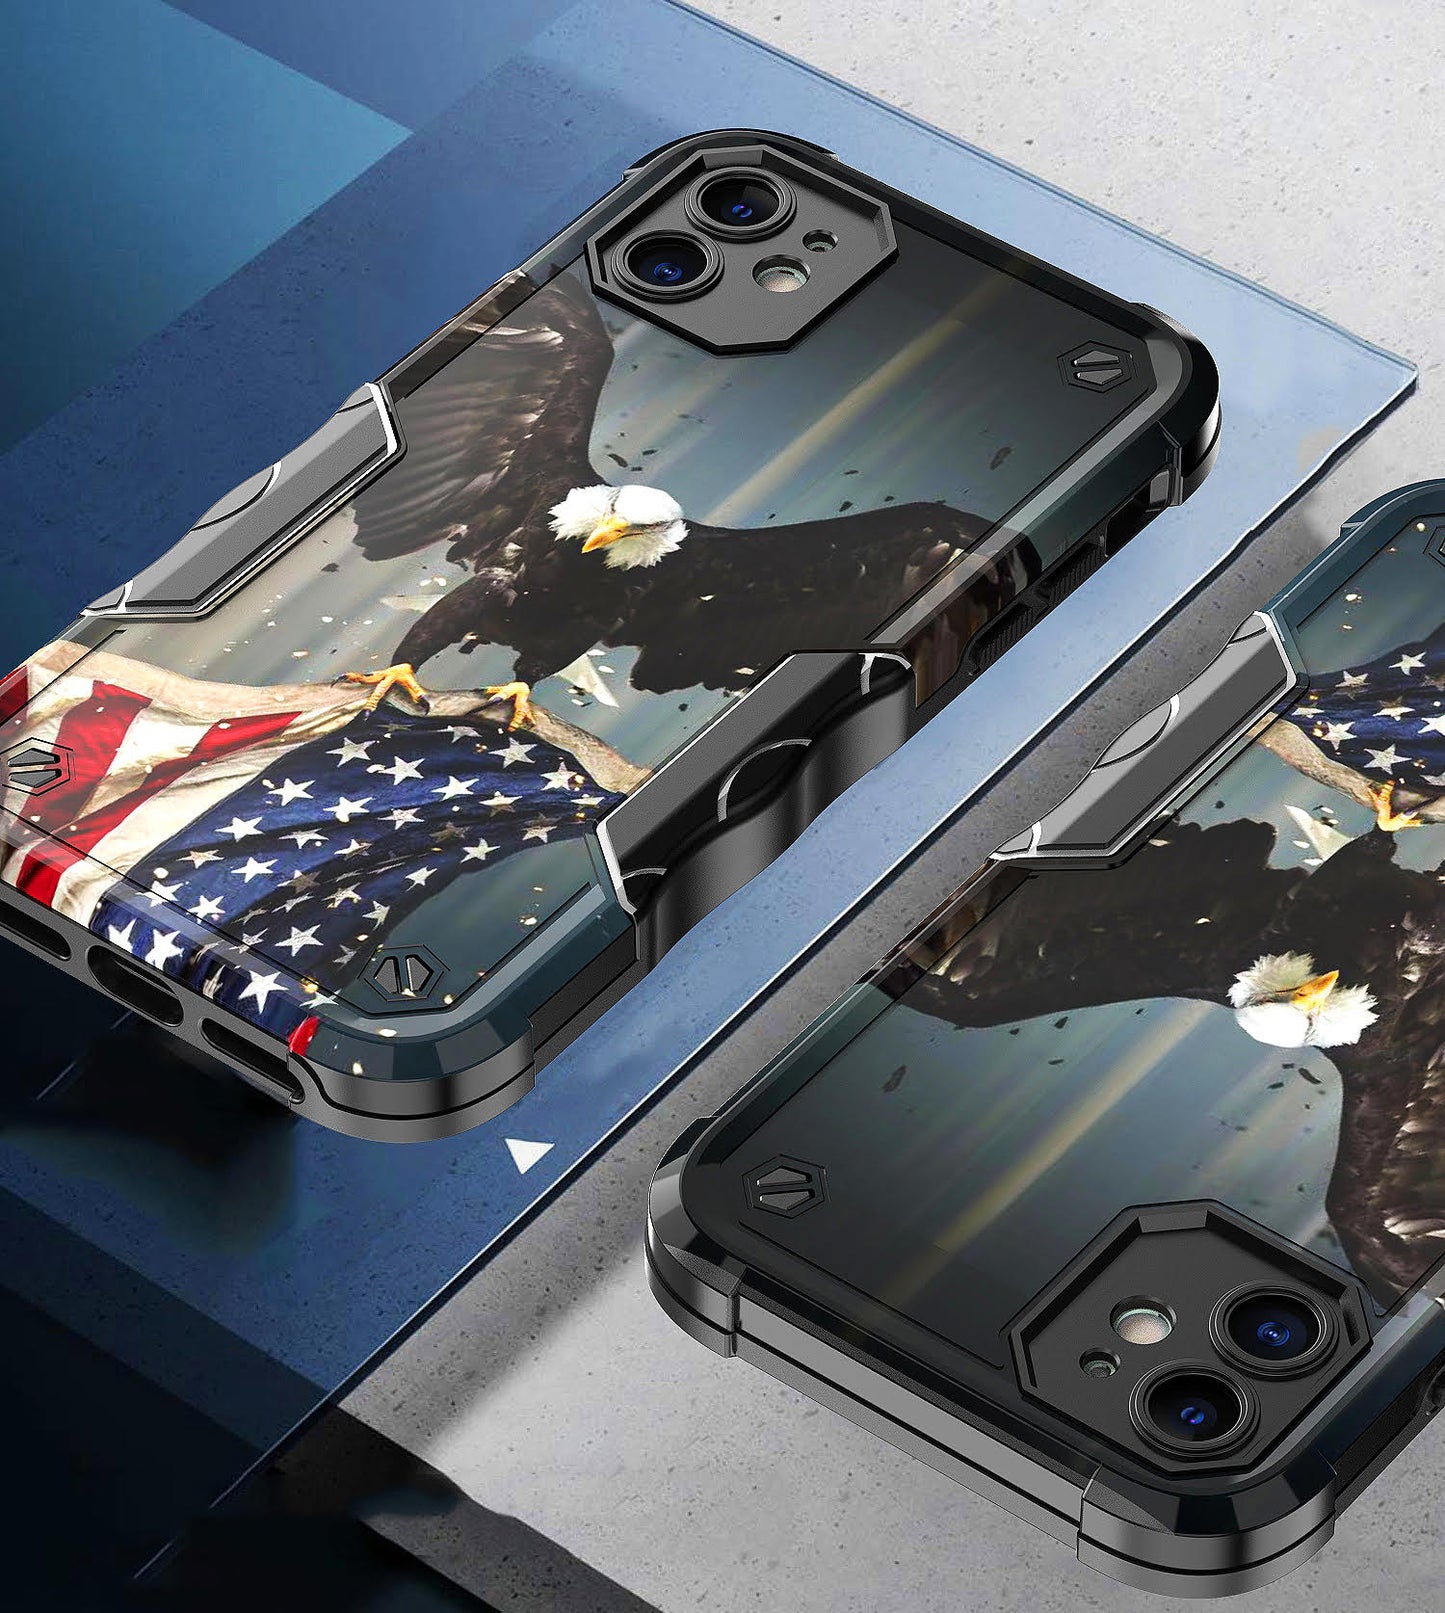 Case For Apple iPhone 12 mini - Hybrid Grip Design Shockproof Phone Cover - American Bald Eagle Flying with Flag